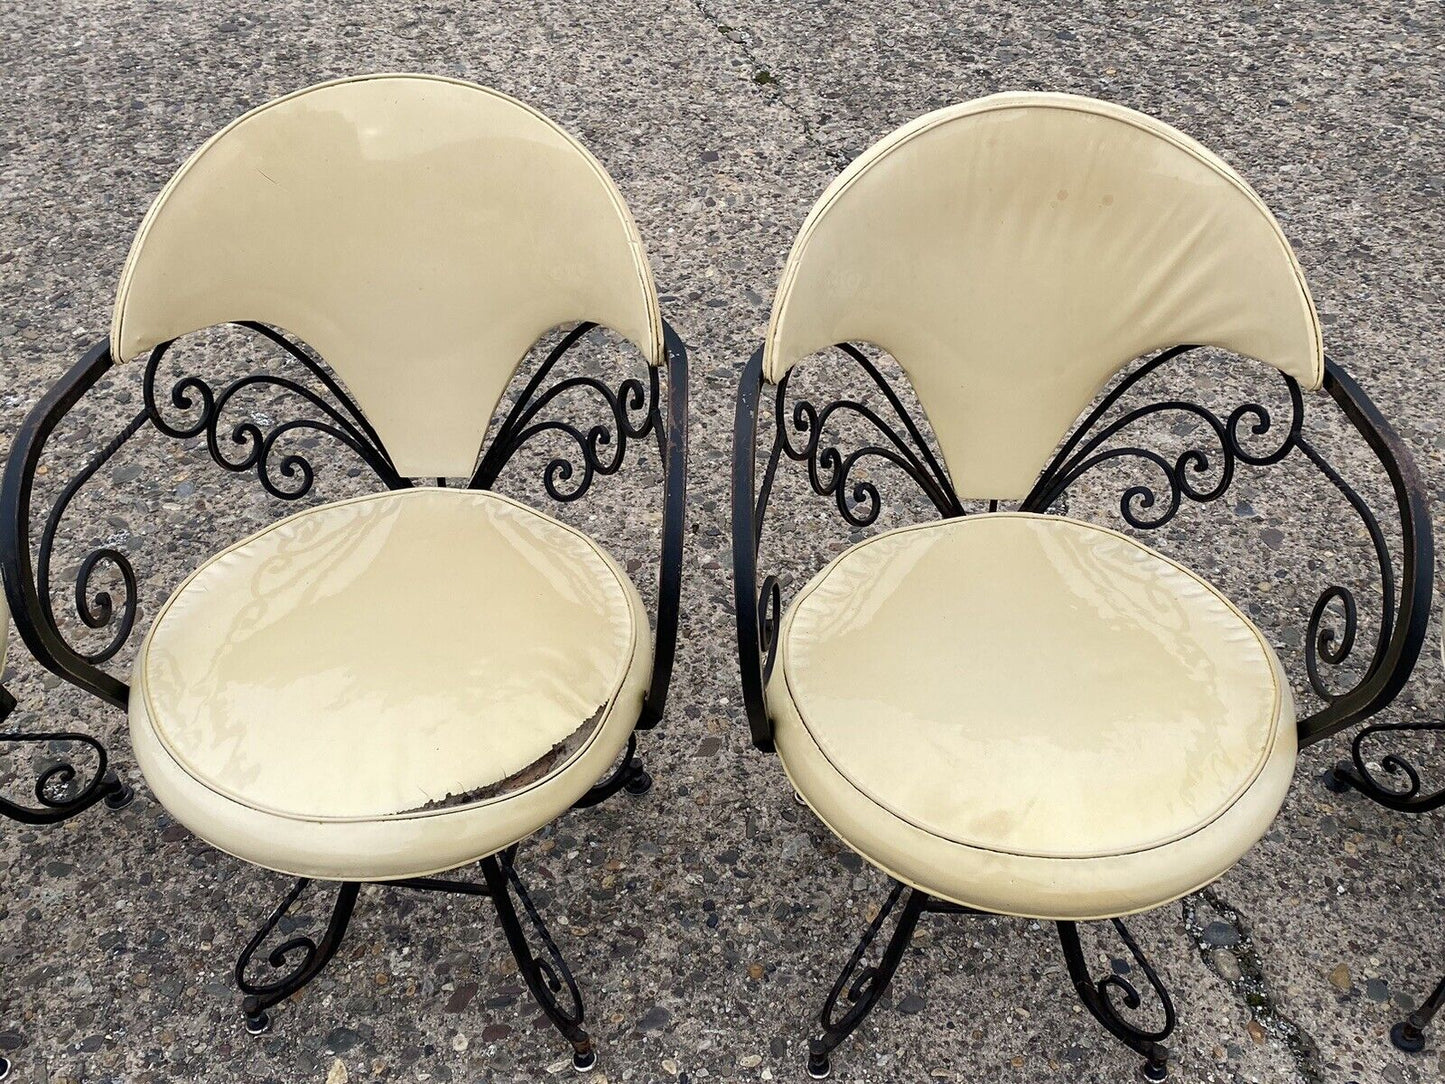 Vintage Hollywood Regency Wrought Iron Butterfly Swivel Club Chairs - Set of 4